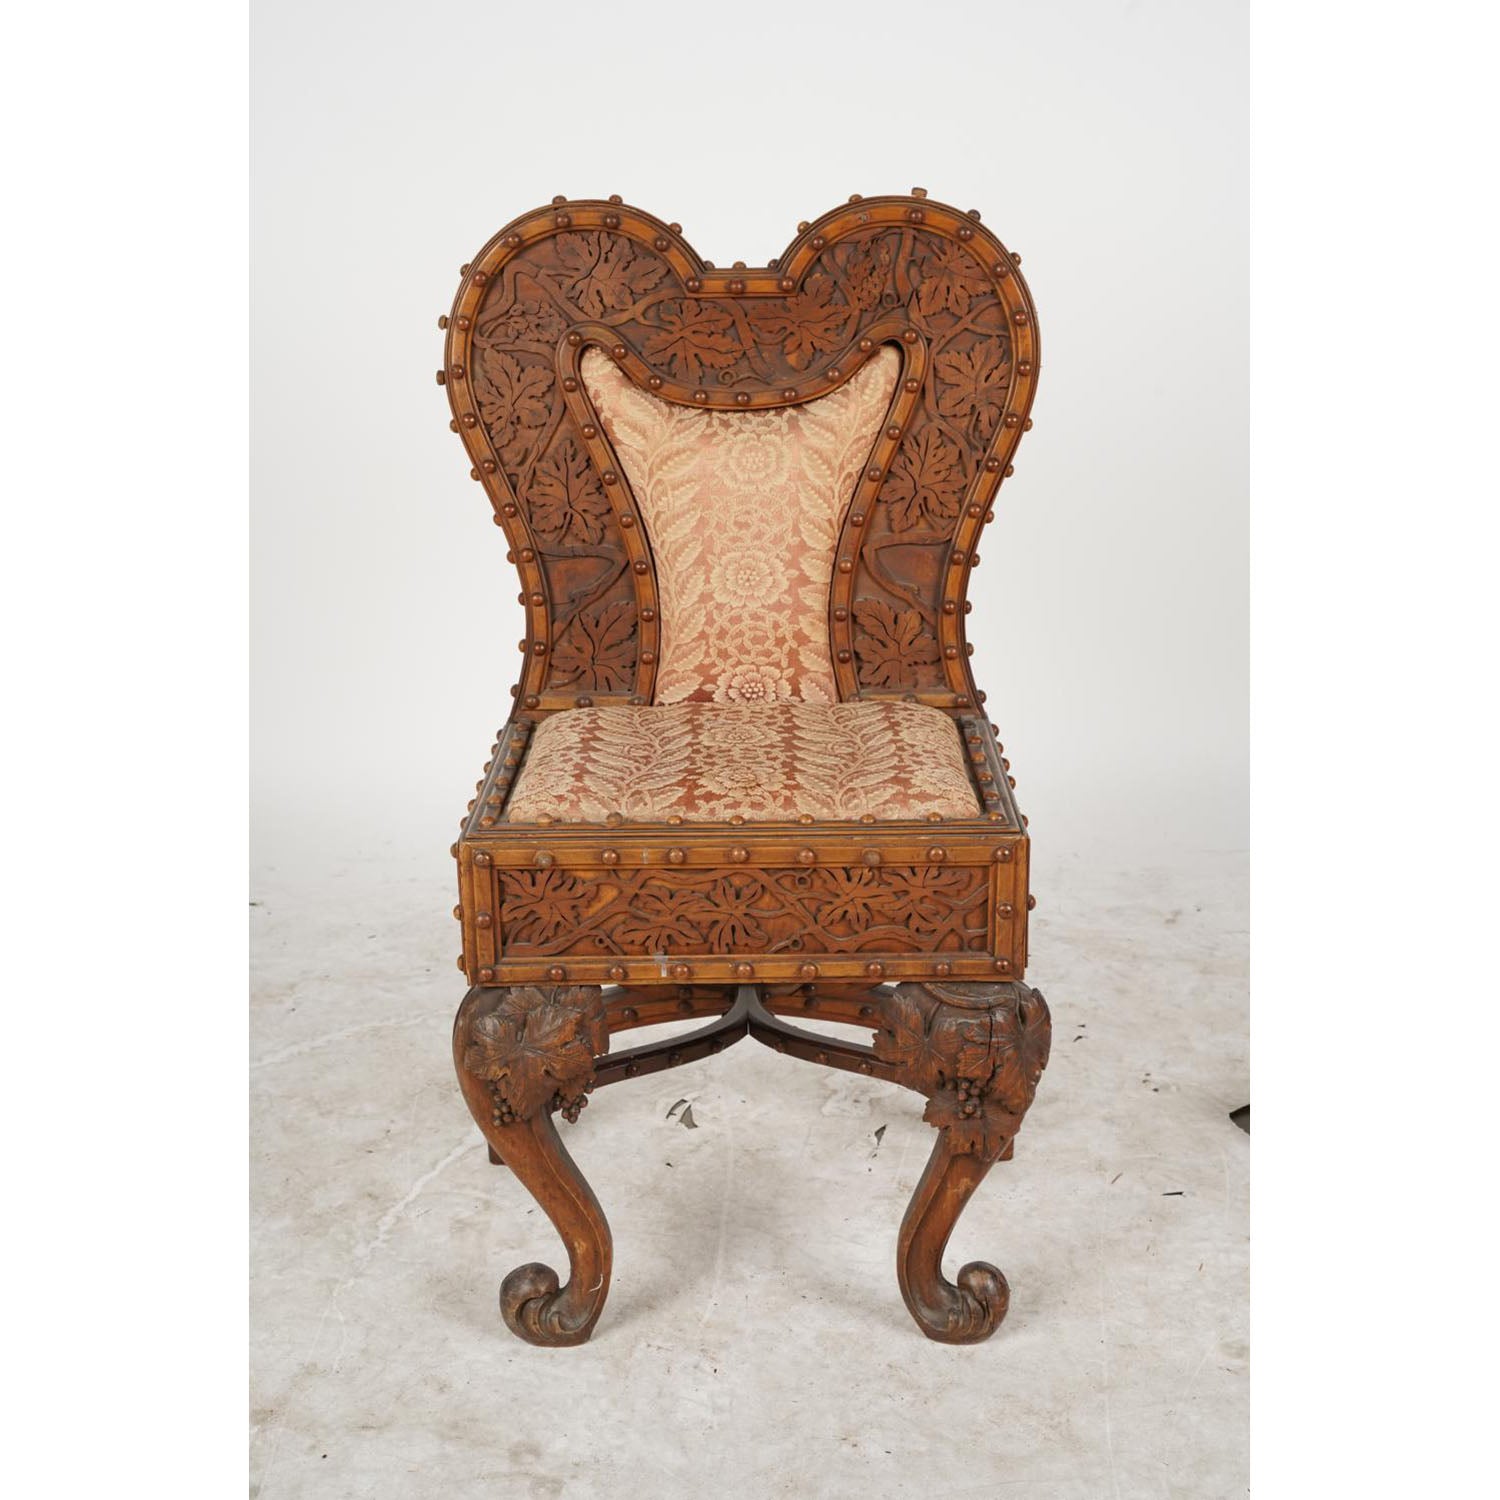 AF2-107: ANTIQUE LATE 19TH CENTURY AMERICAN VICTORIAN HIGHLY CARVED WALNUT SIDE CHAIR